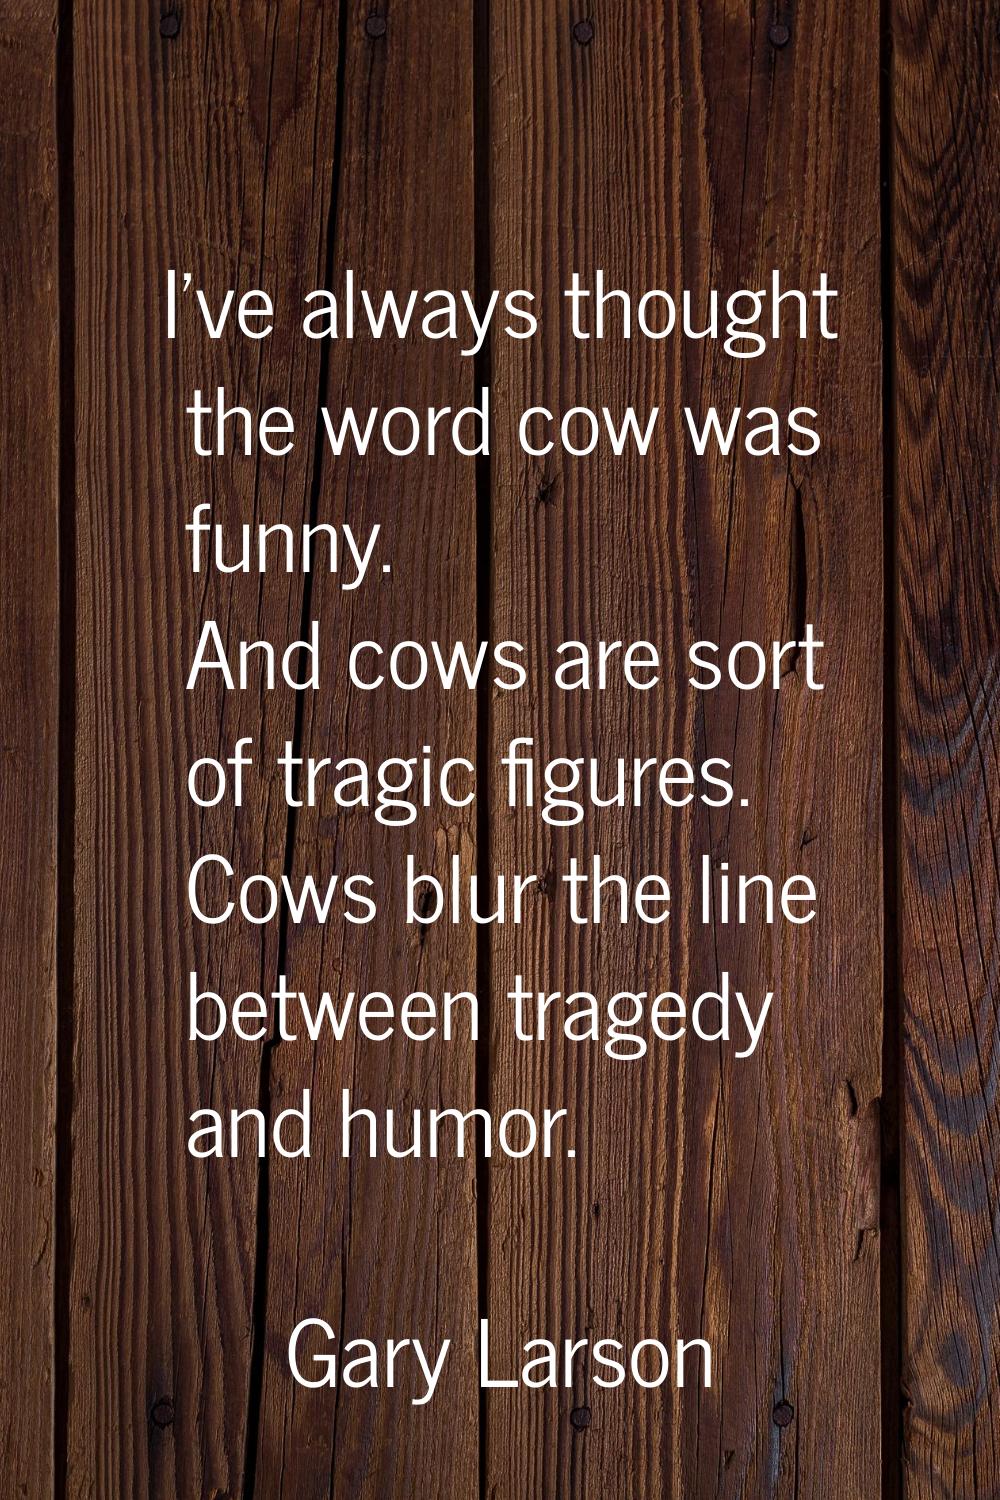 I've always thought the word cow was funny. And cows are sort of tragic figures. Cows blur the line